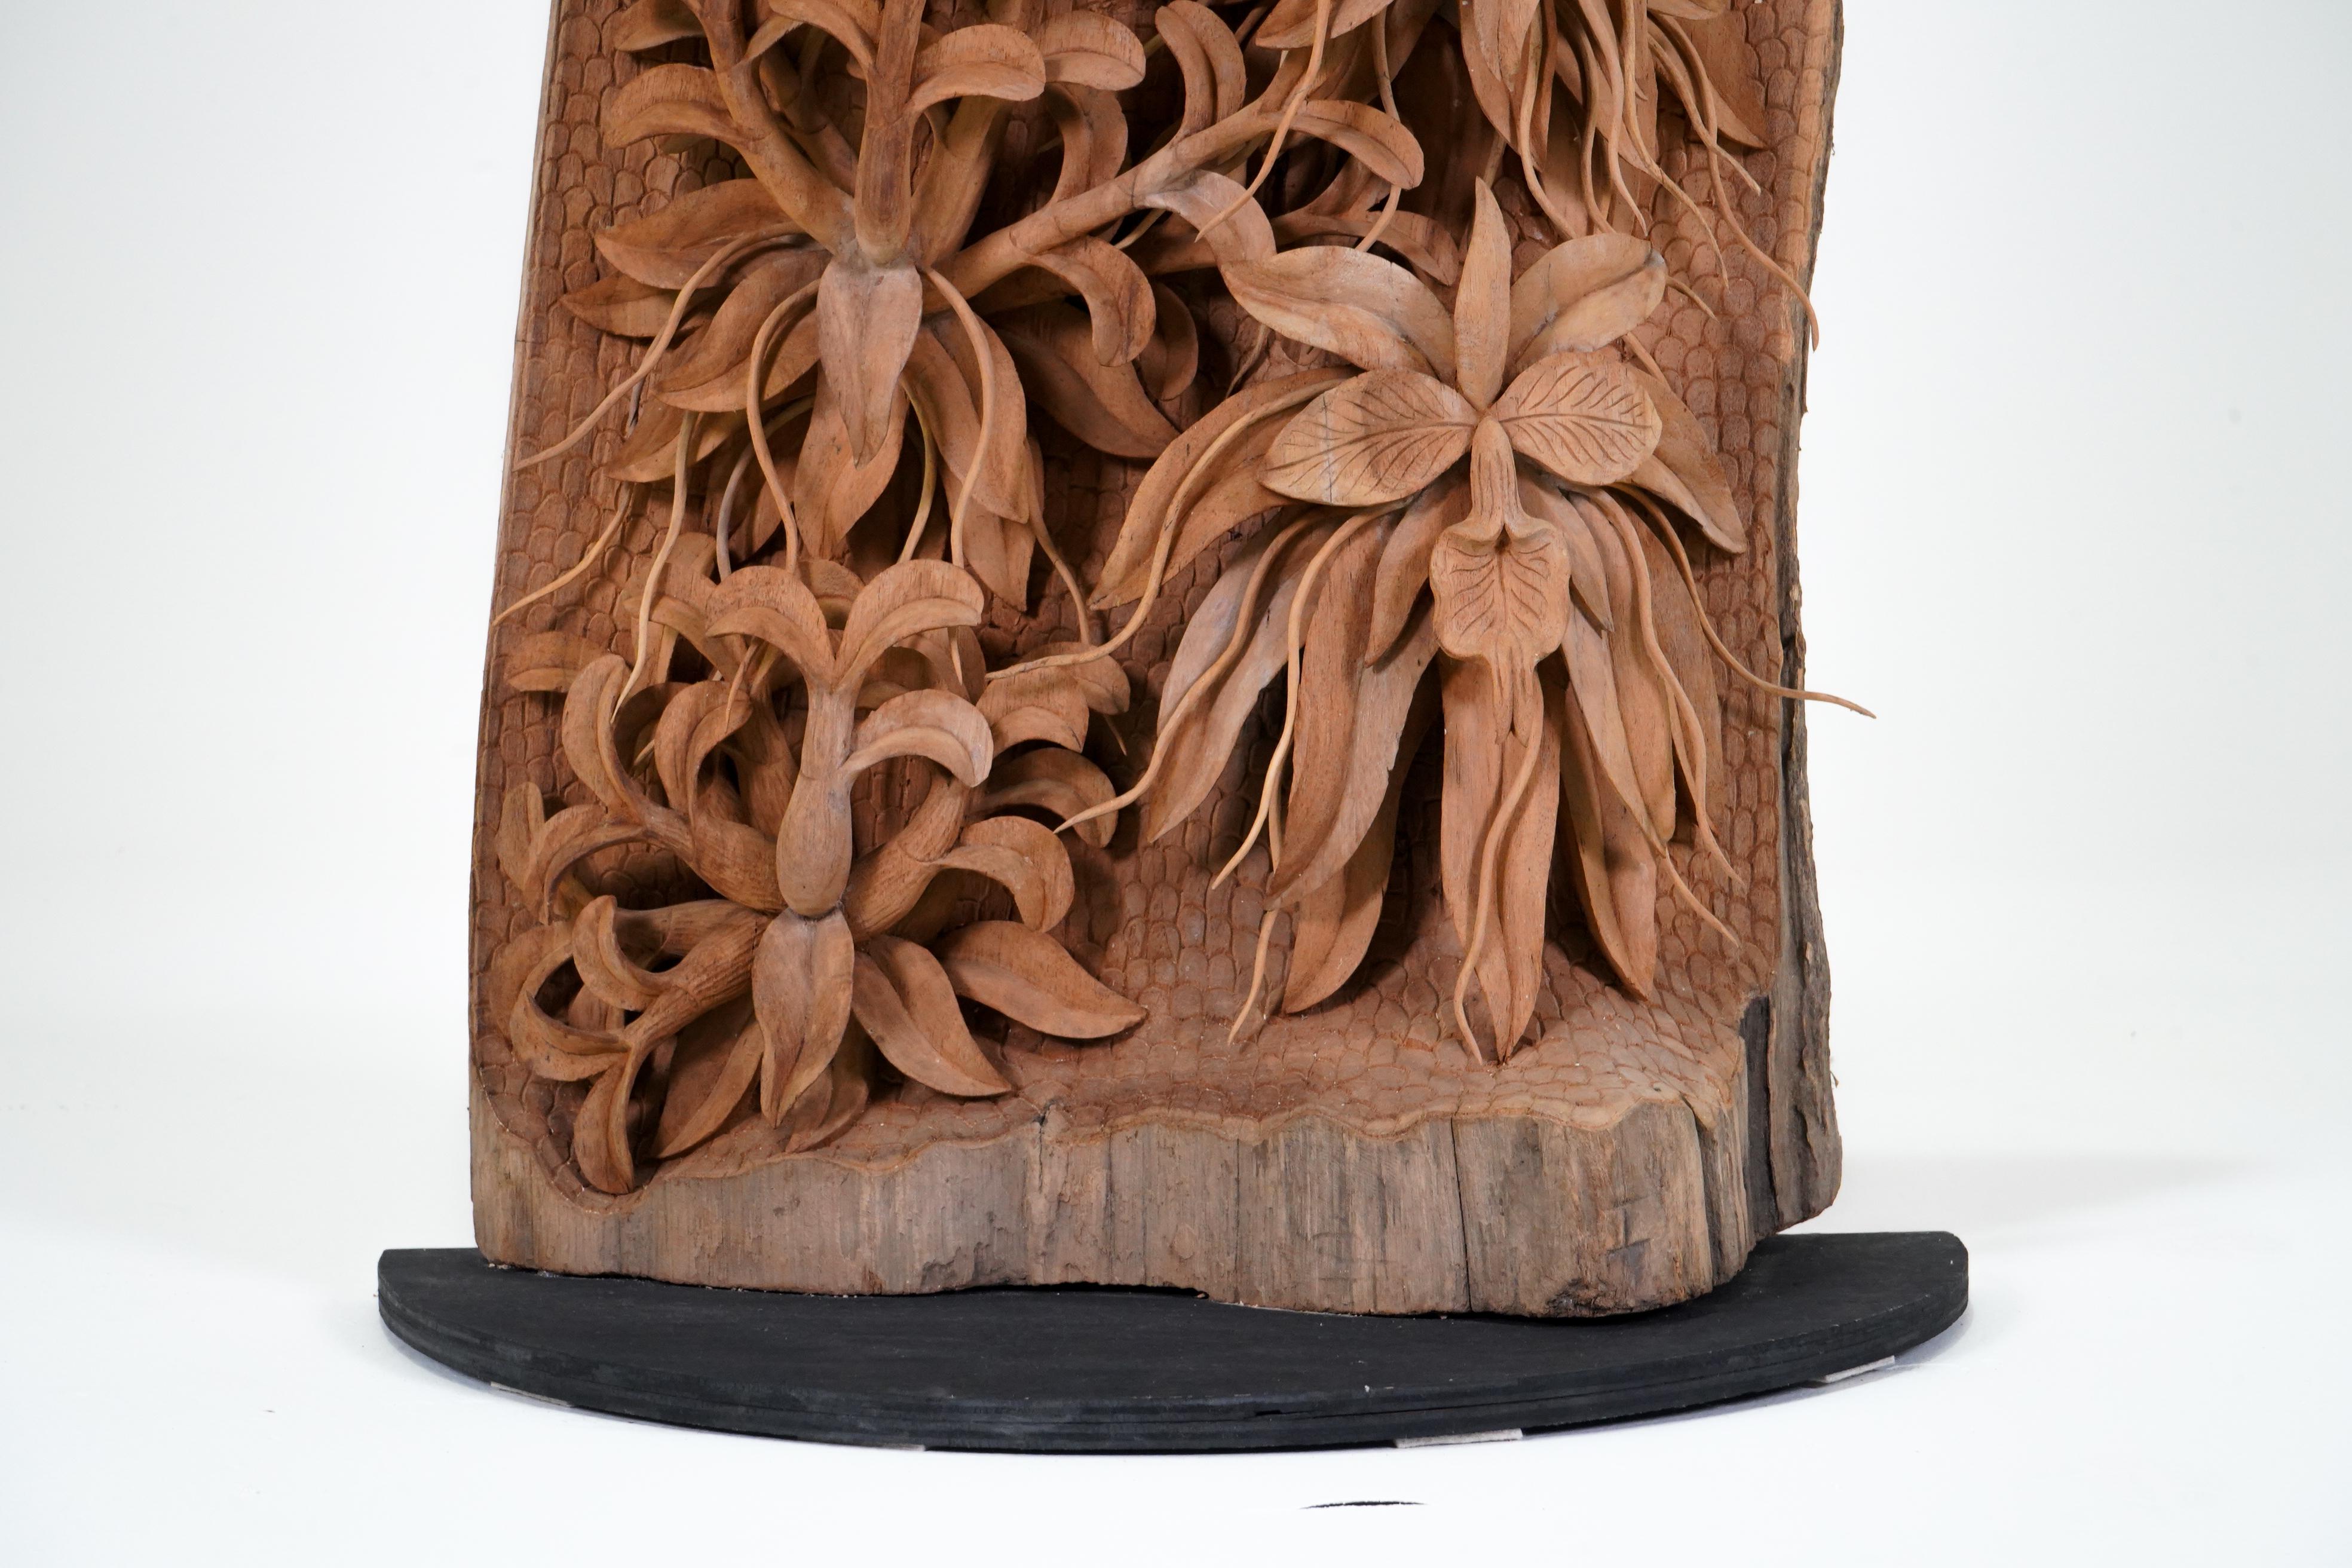 A Teakwood Carving of an Orchid 1